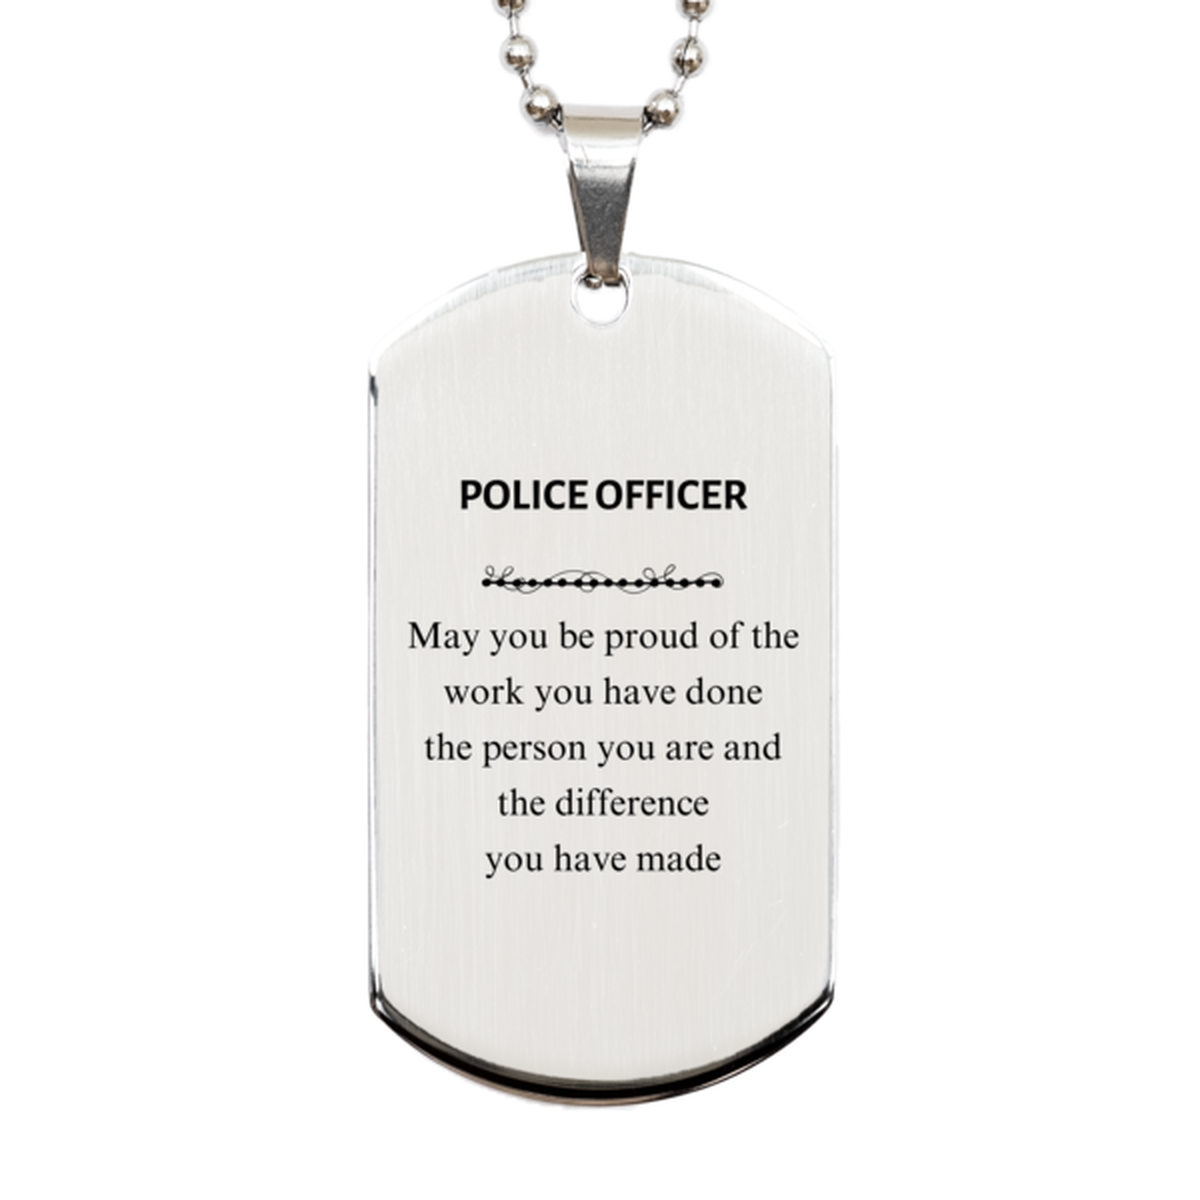 Police Officer May you be proud of the work you have done, Retirement Police Officer Silver Dog Tag for Colleague Appreciation Gifts Amazing for Police Officer